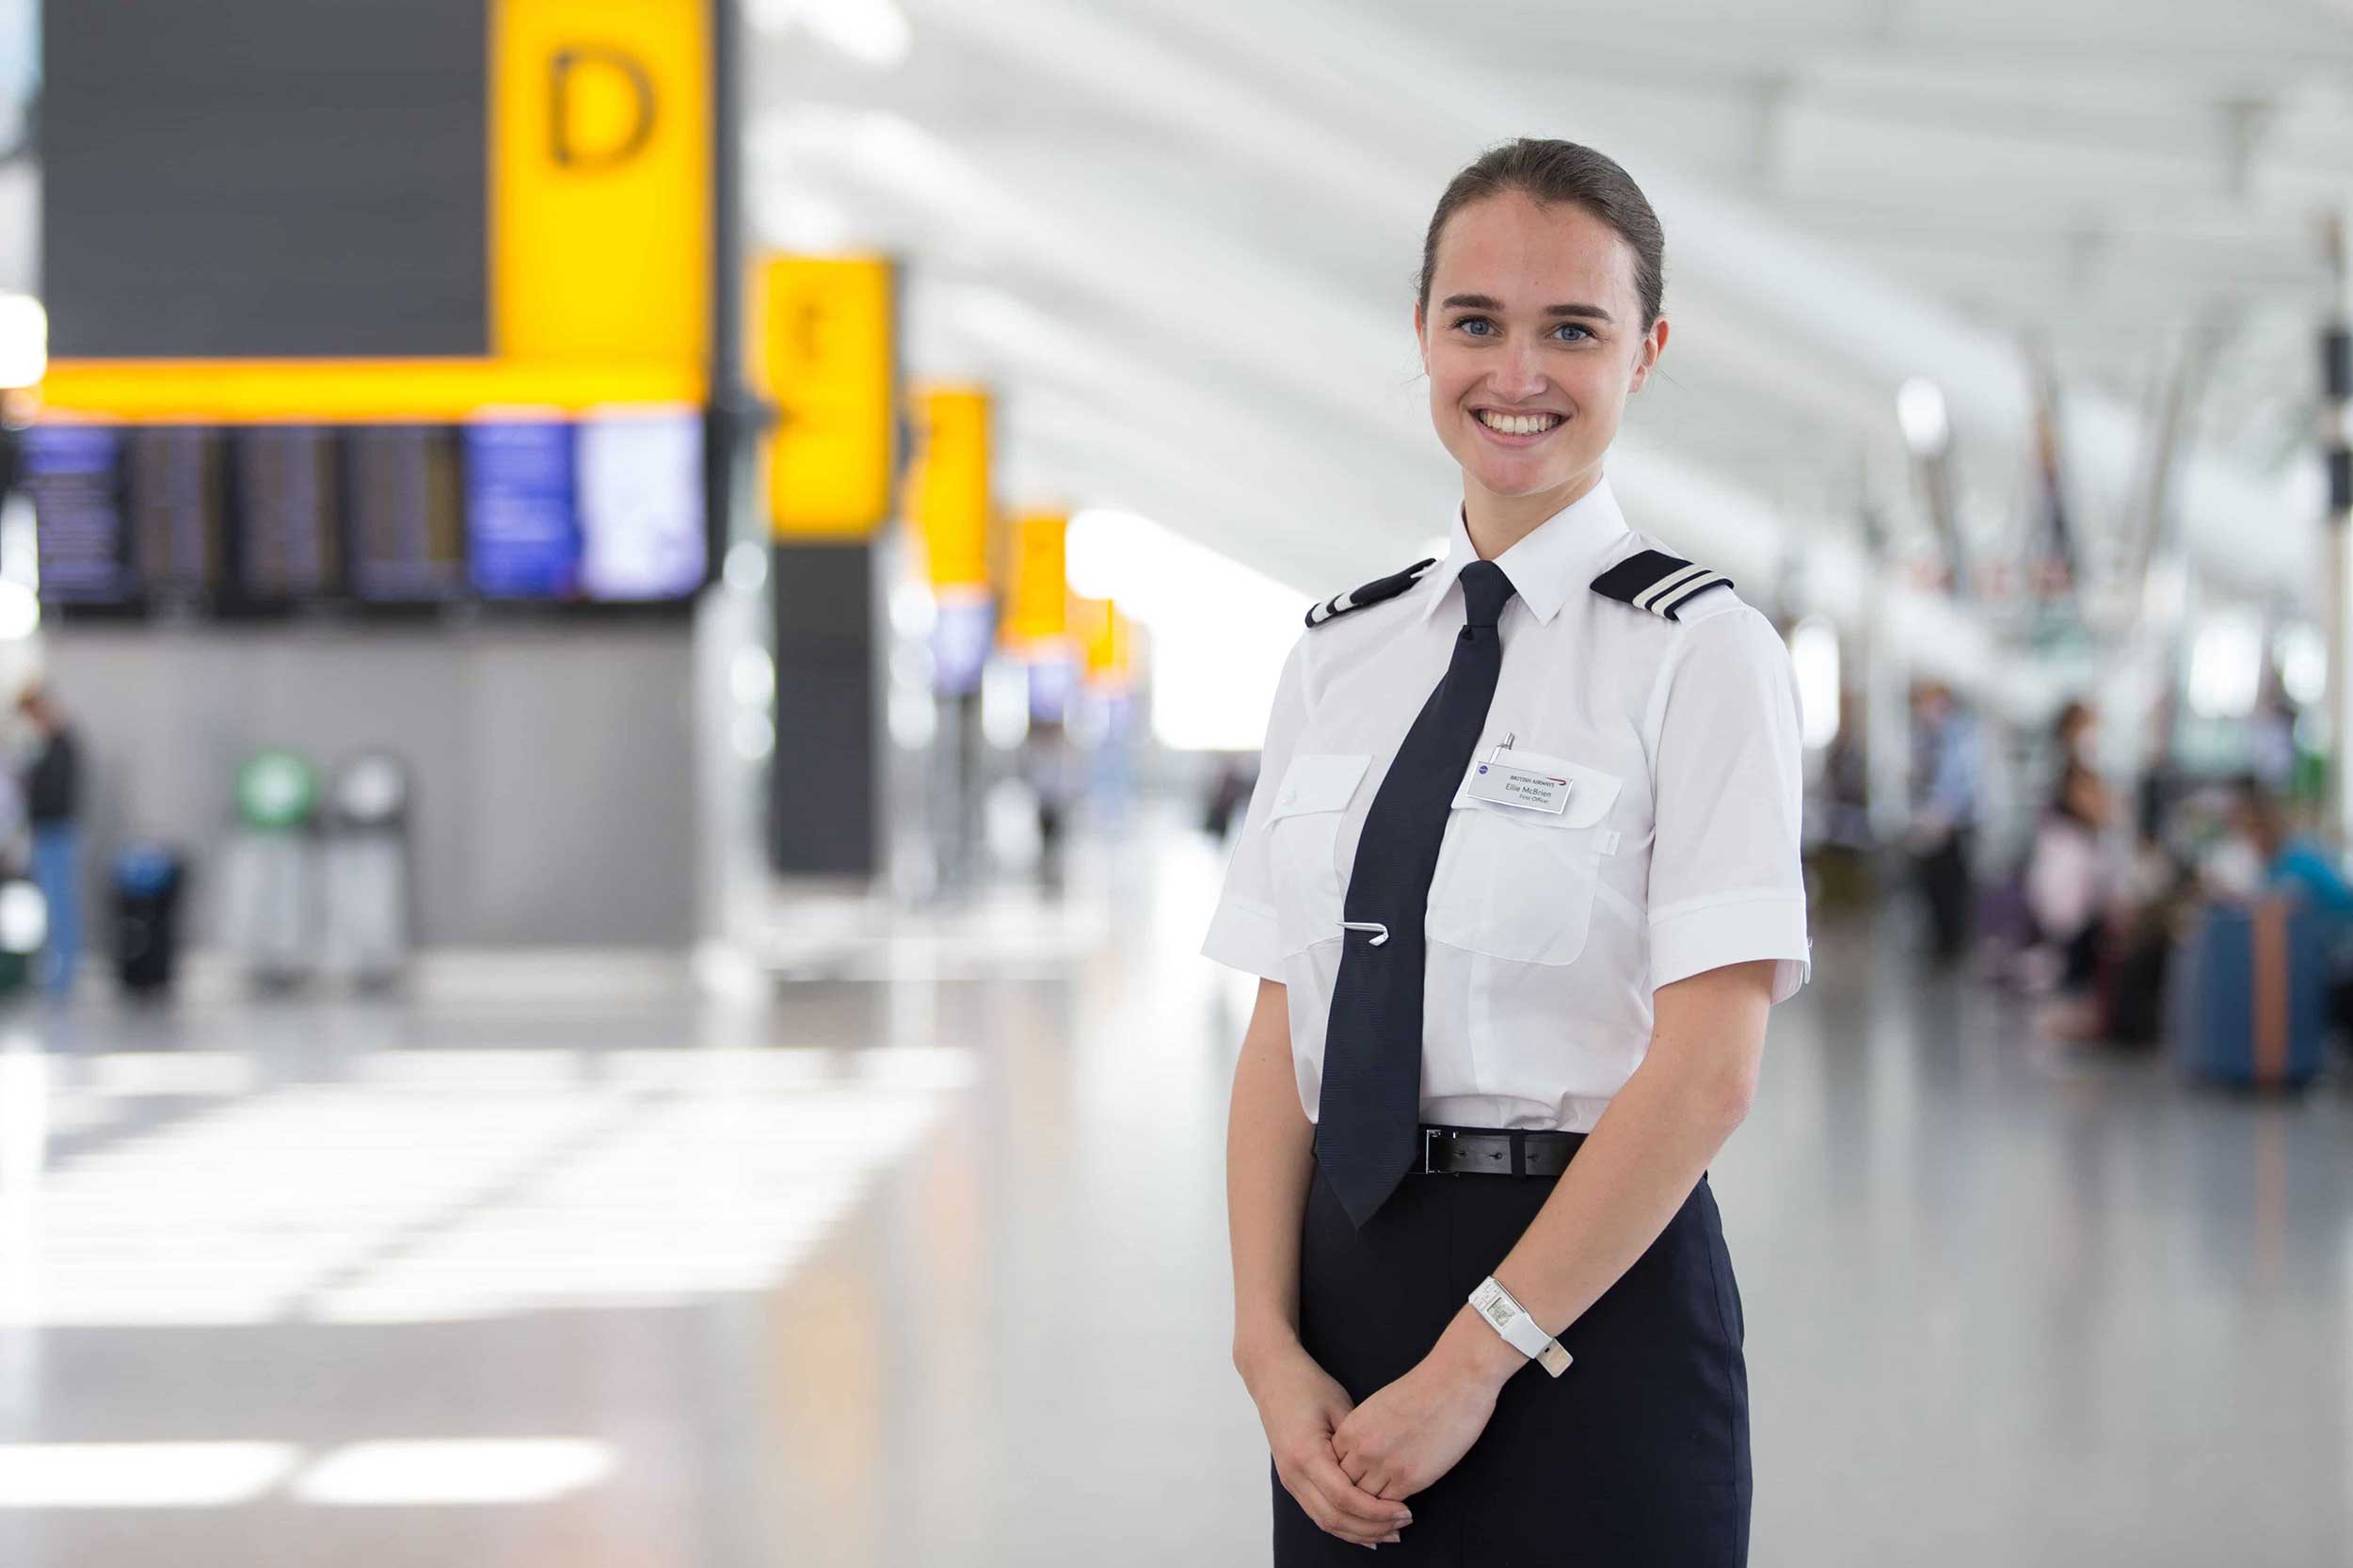 Eleanor McBrien is a Senior First Officer, flying an Airbus A320 for British Airways